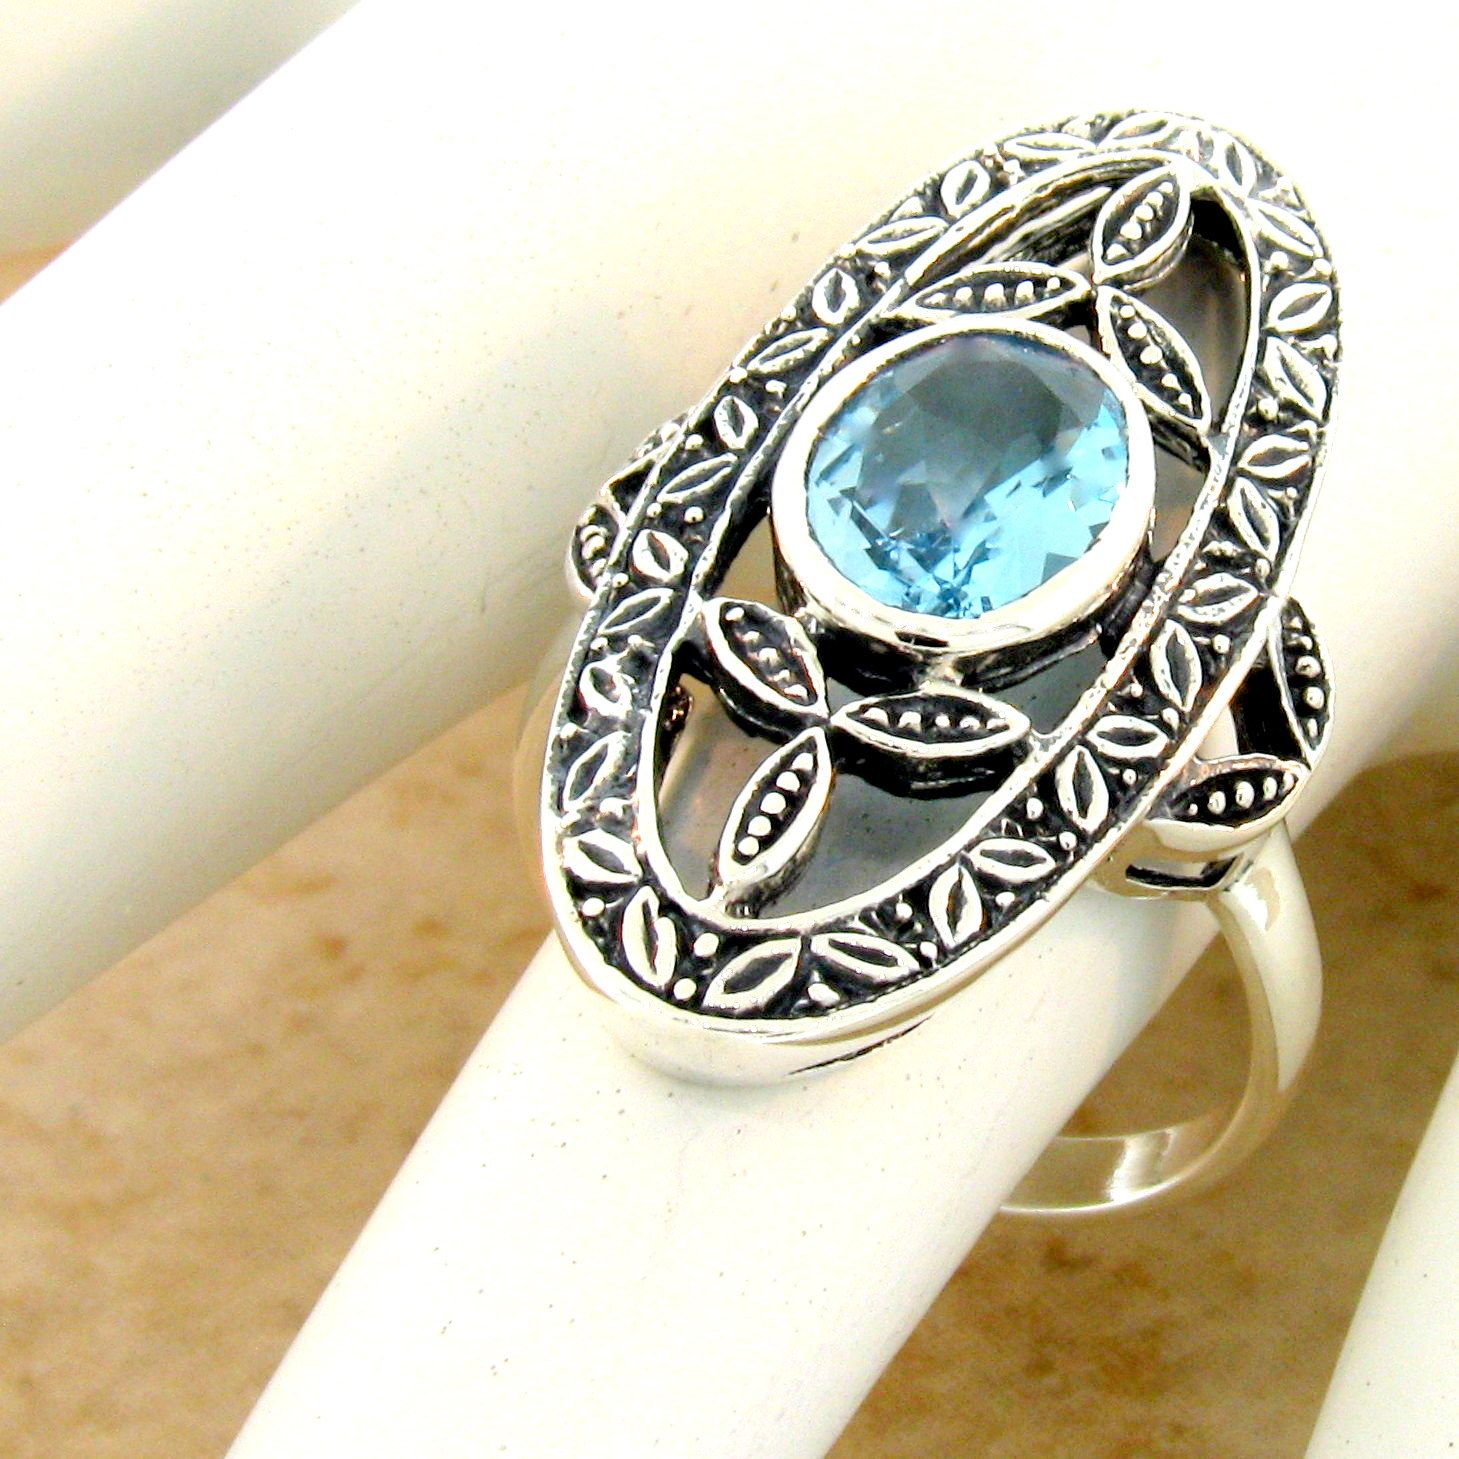 2 CT GENUINE BLUE TOPAZ 925 STERLING SILVER VICTORIAN ANTIQUE STYLE RING #1097